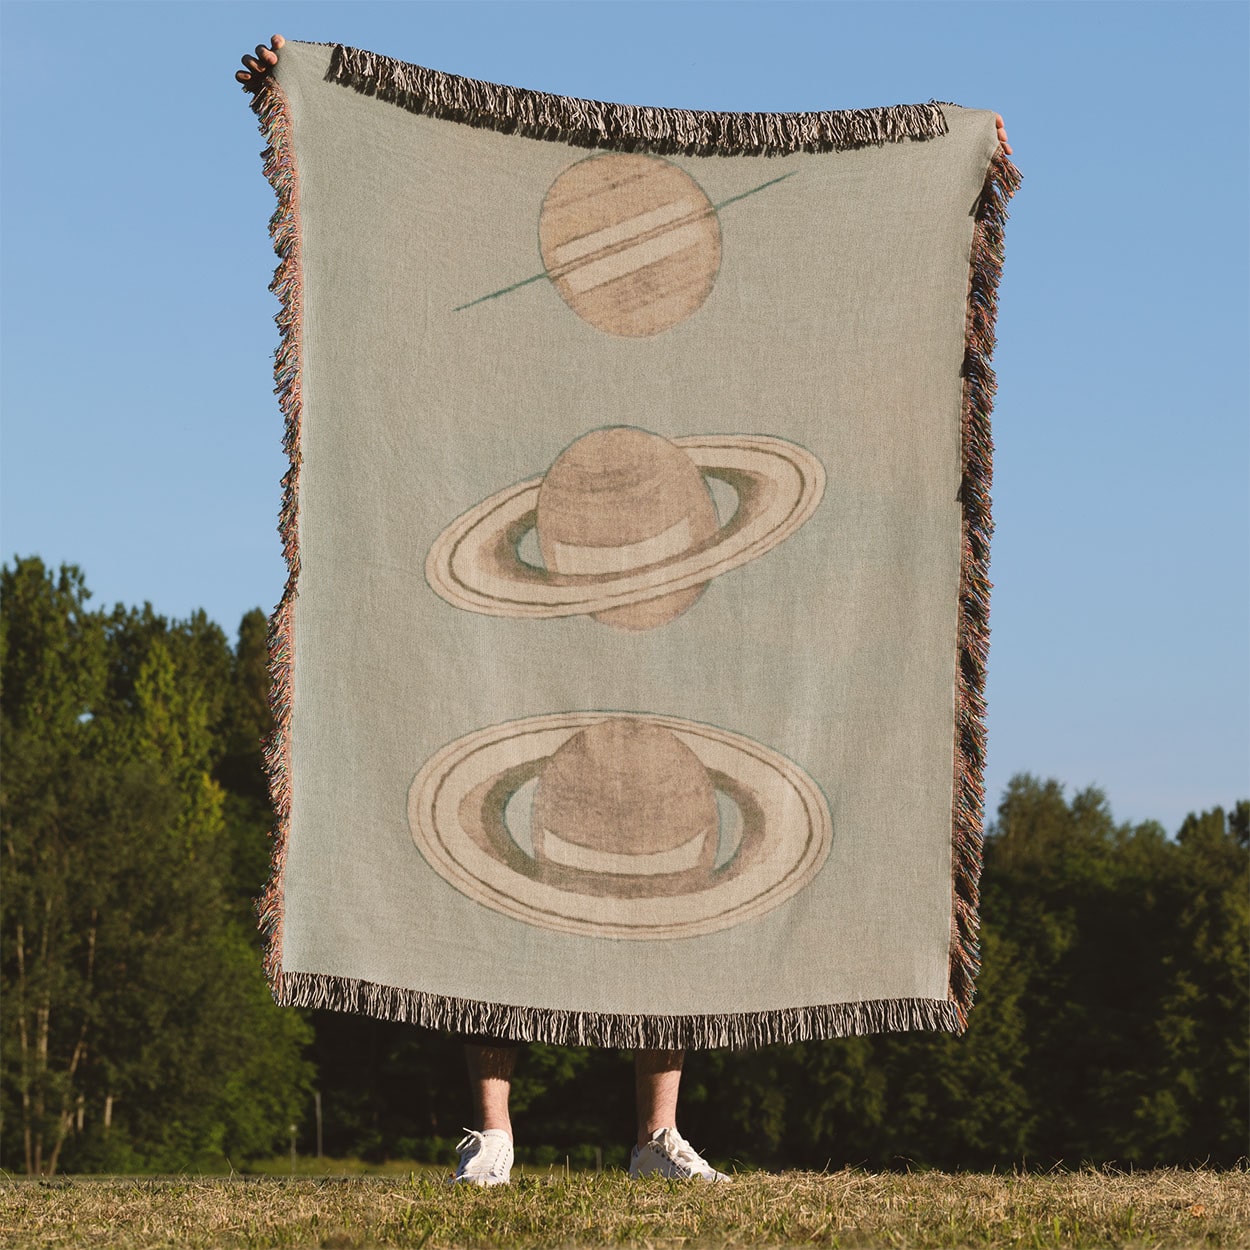 The Rings of Saturn Woven Blanket Held Up Outside